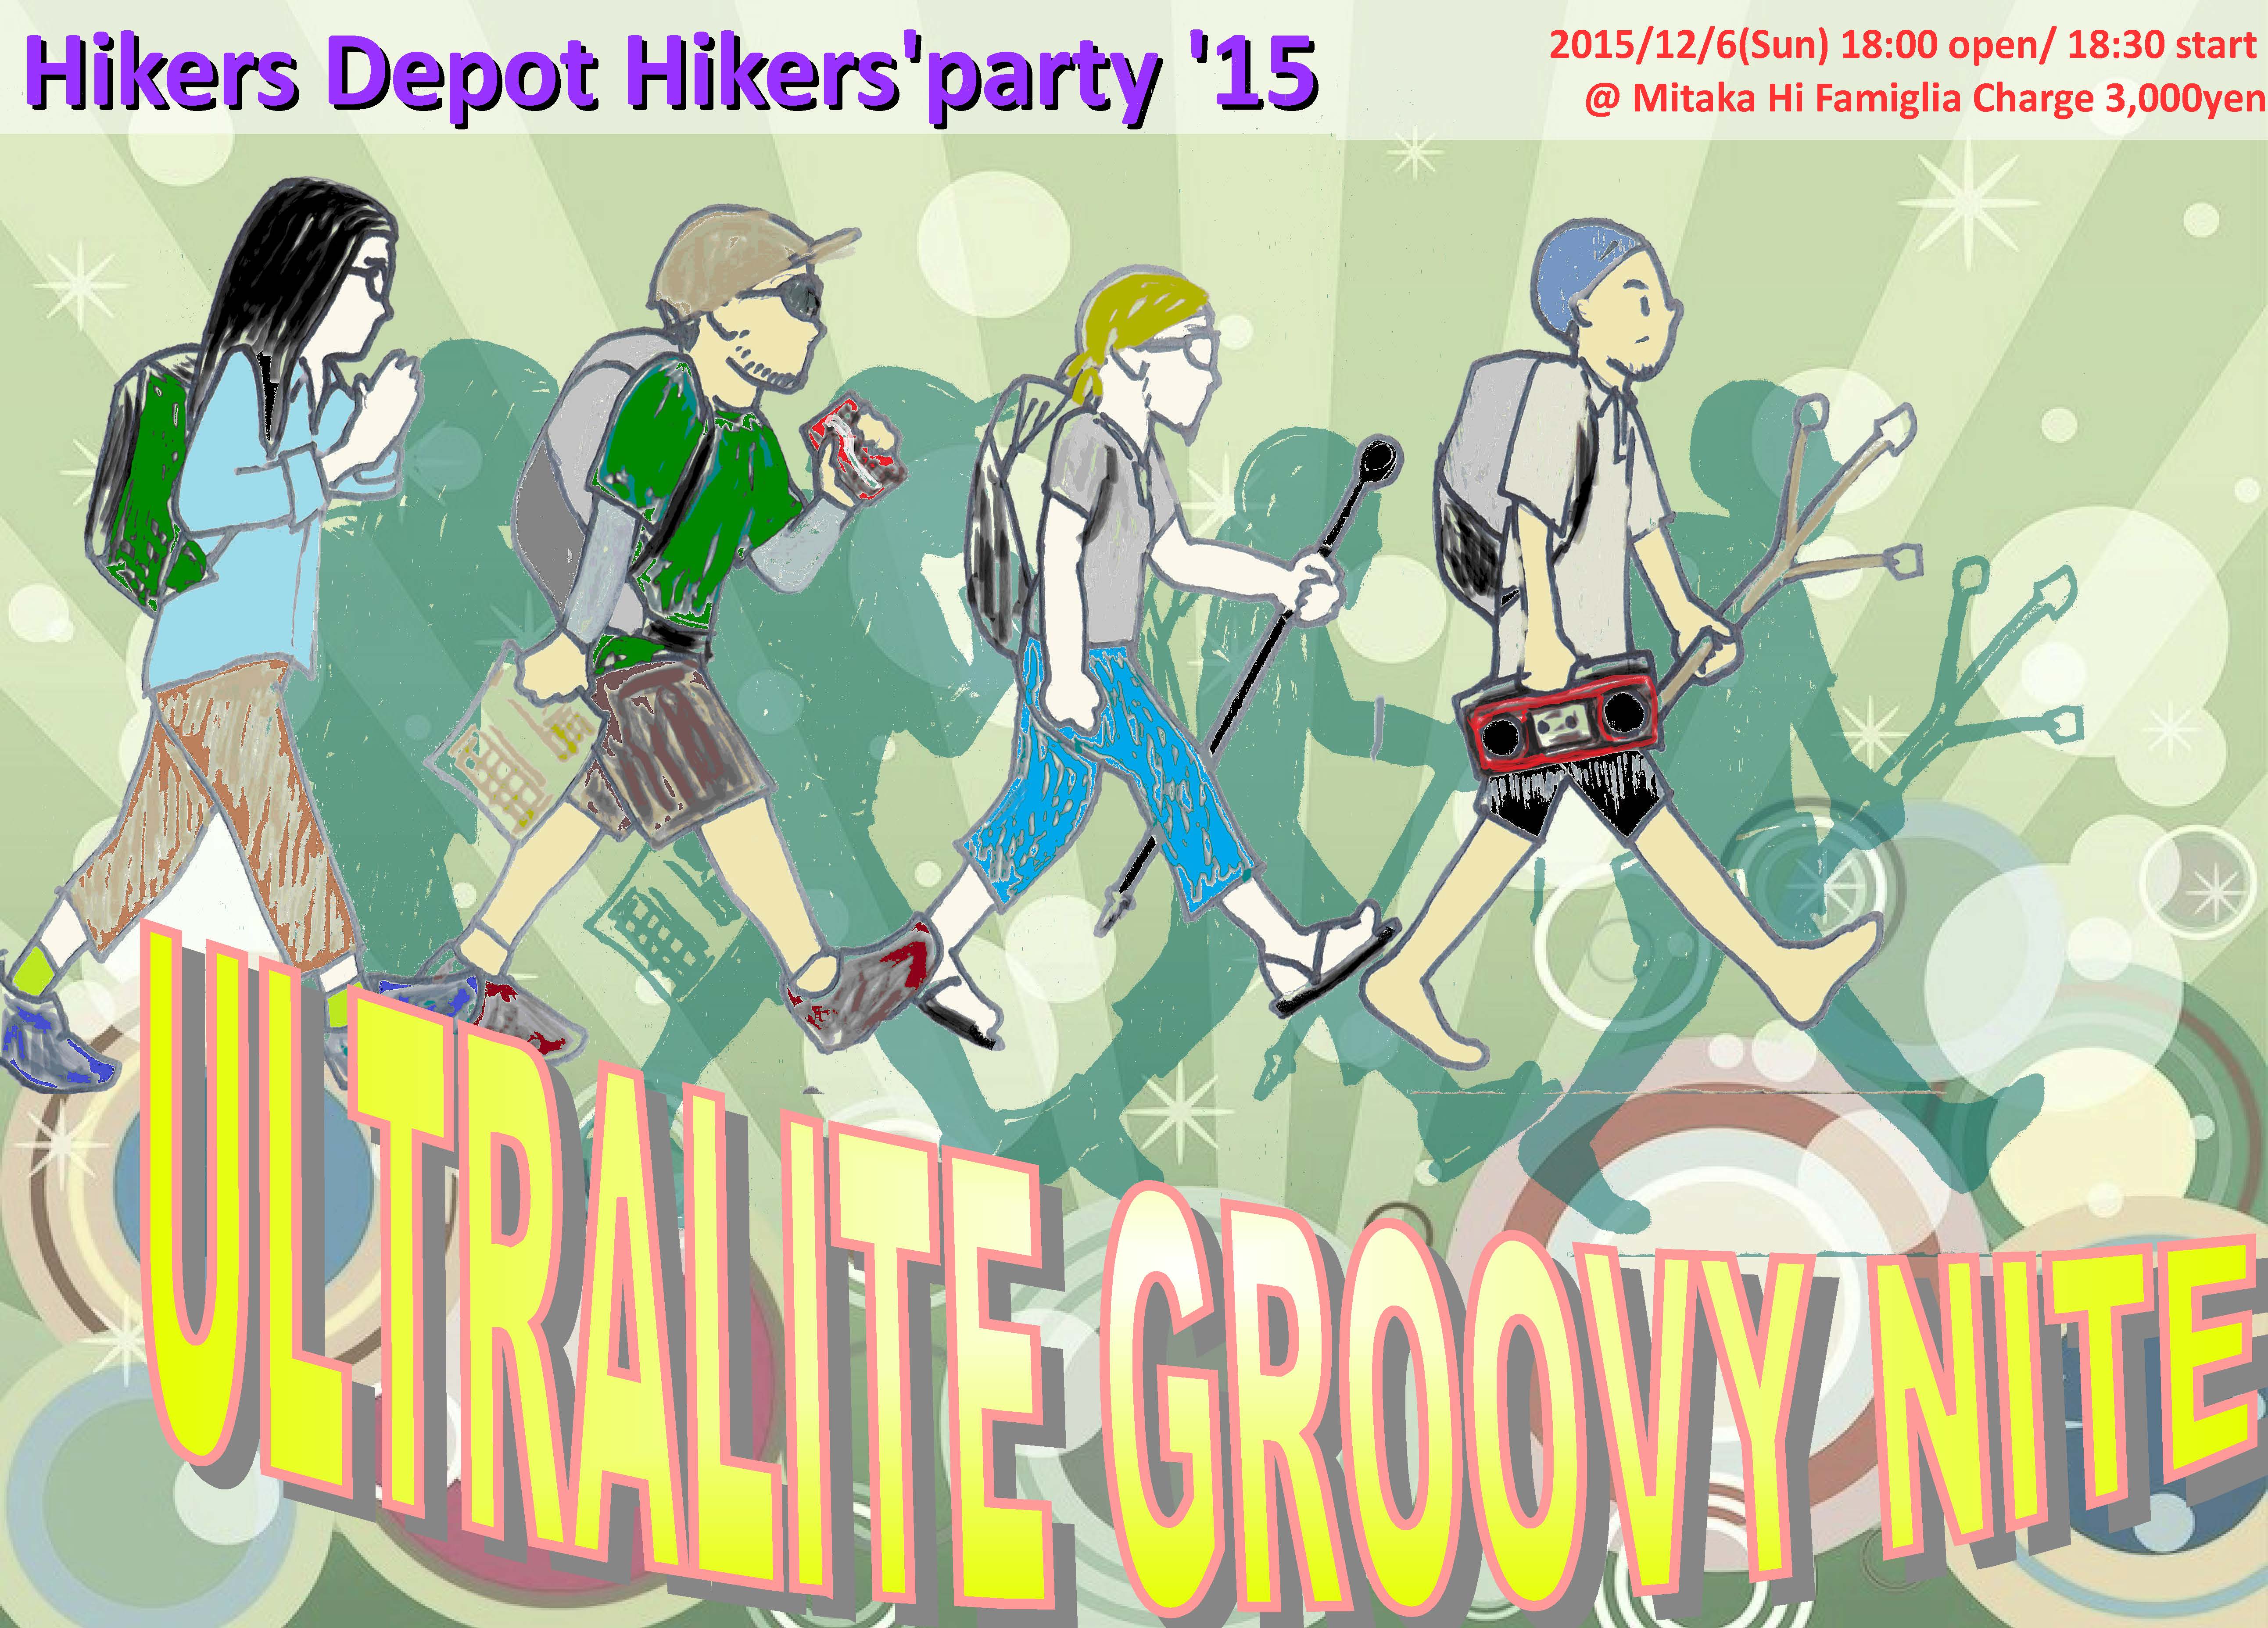 Hikers' Party 2015は　”Ultralight Groovy Night”